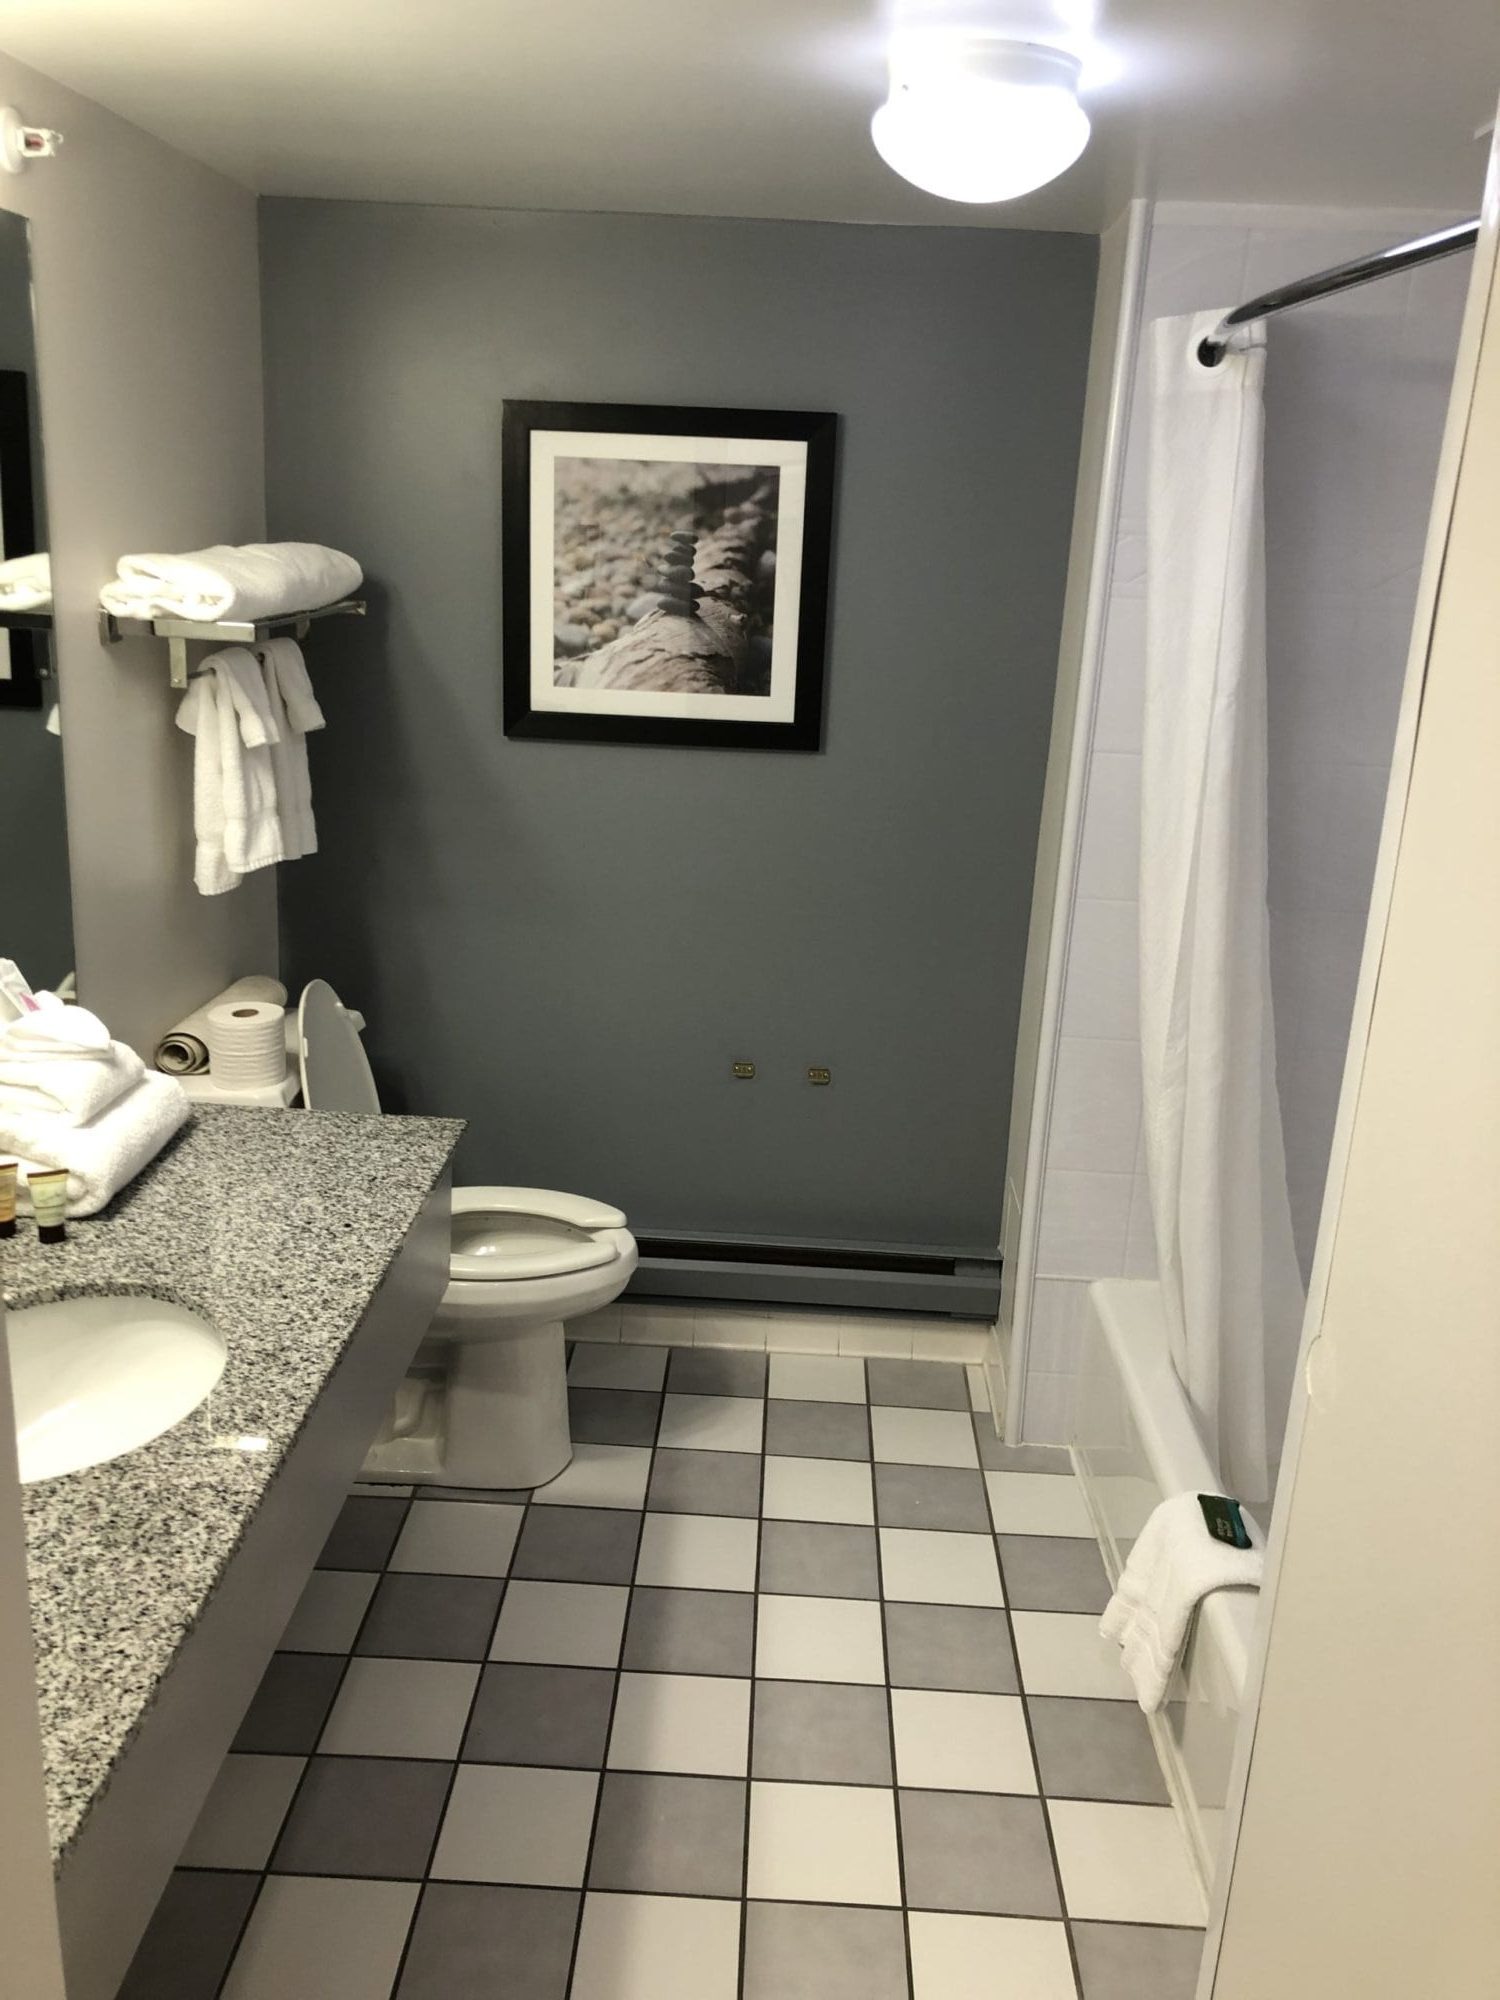 Photo of the bathroom of the Accessible King Suite at the Acadia Inn.